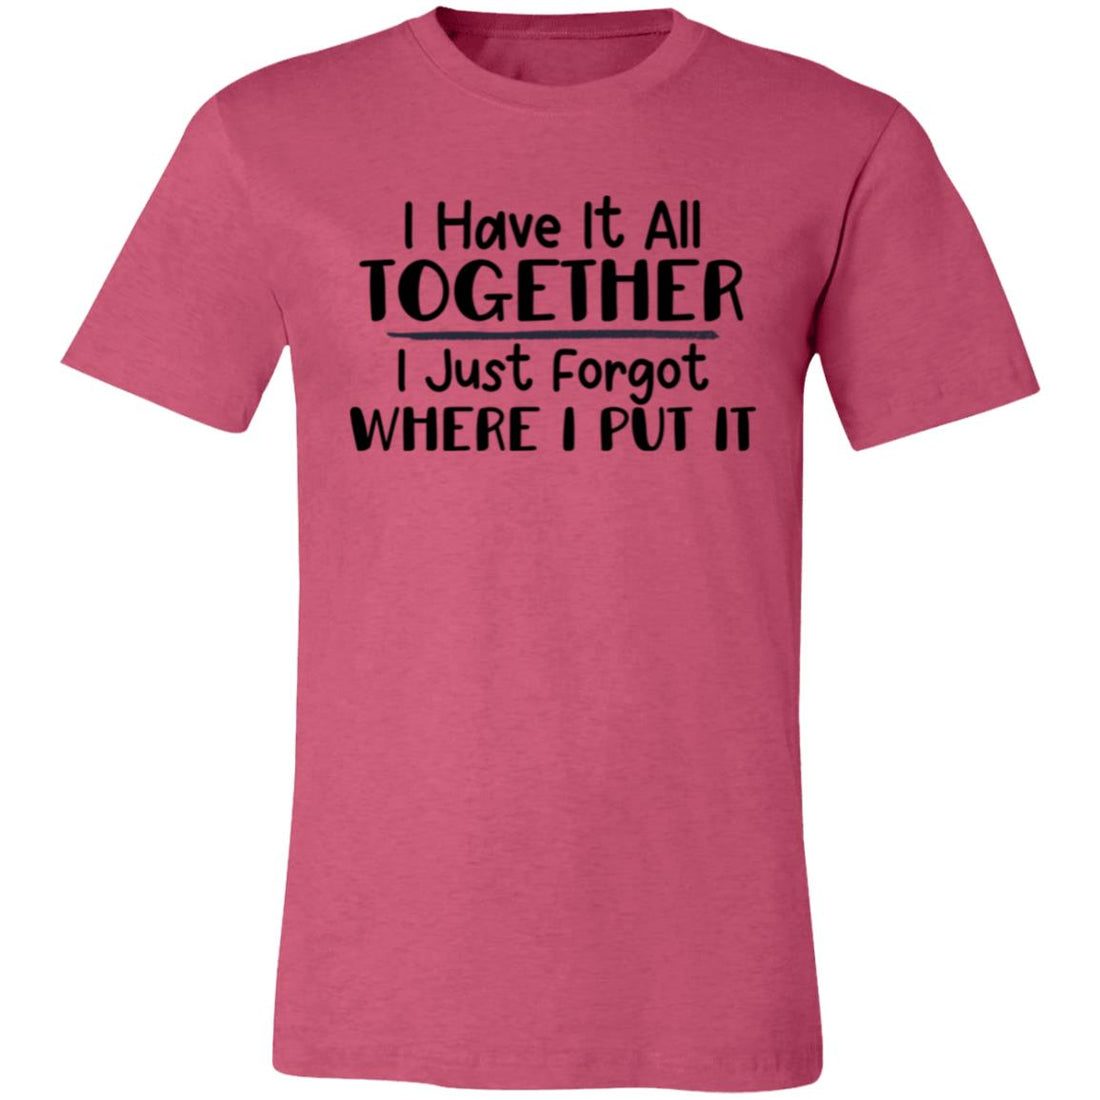 Have It All Together Unisex Jersey Short-Sleeve T-Shirt - T-Shirts - Positively Sassy - Have It All Together Unisex Jersey Short-Sleeve T-Shirt